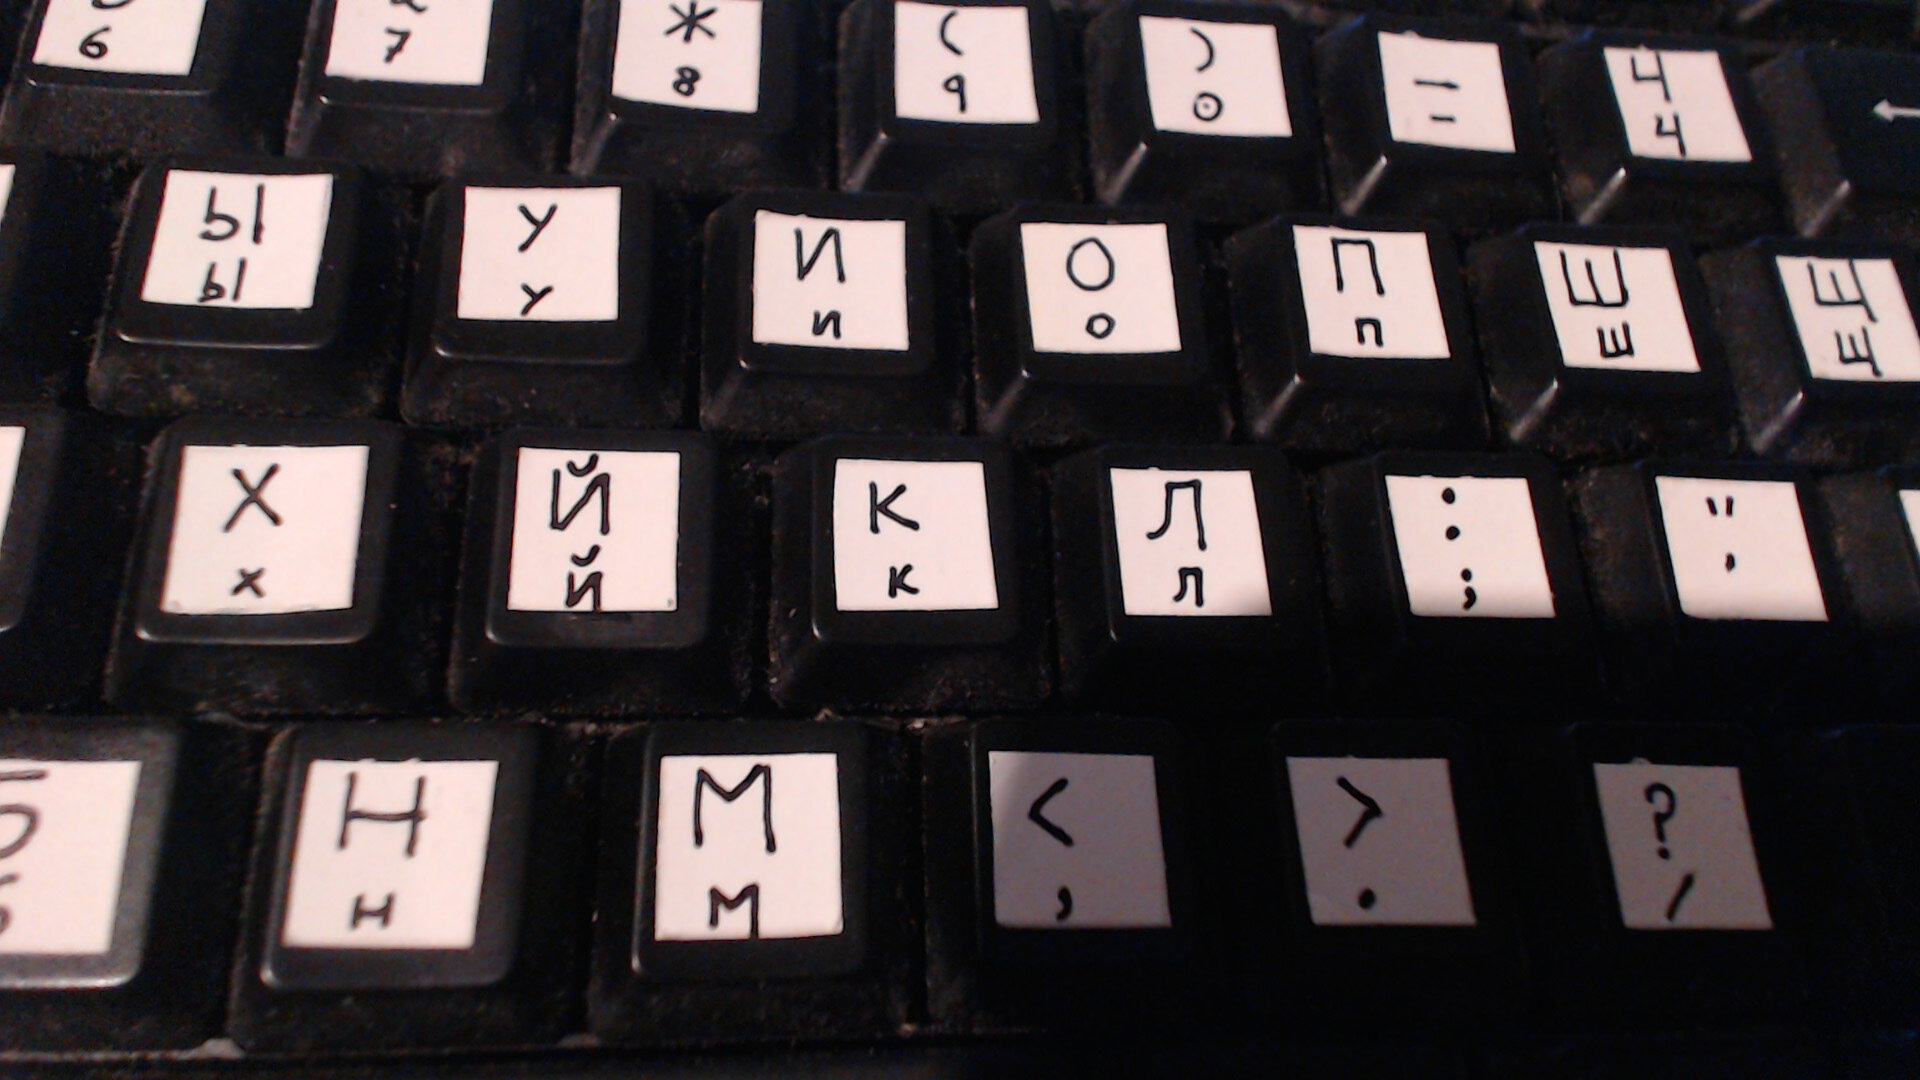 My hand-made Russian (phonetic) keyboards, image 2 of 14